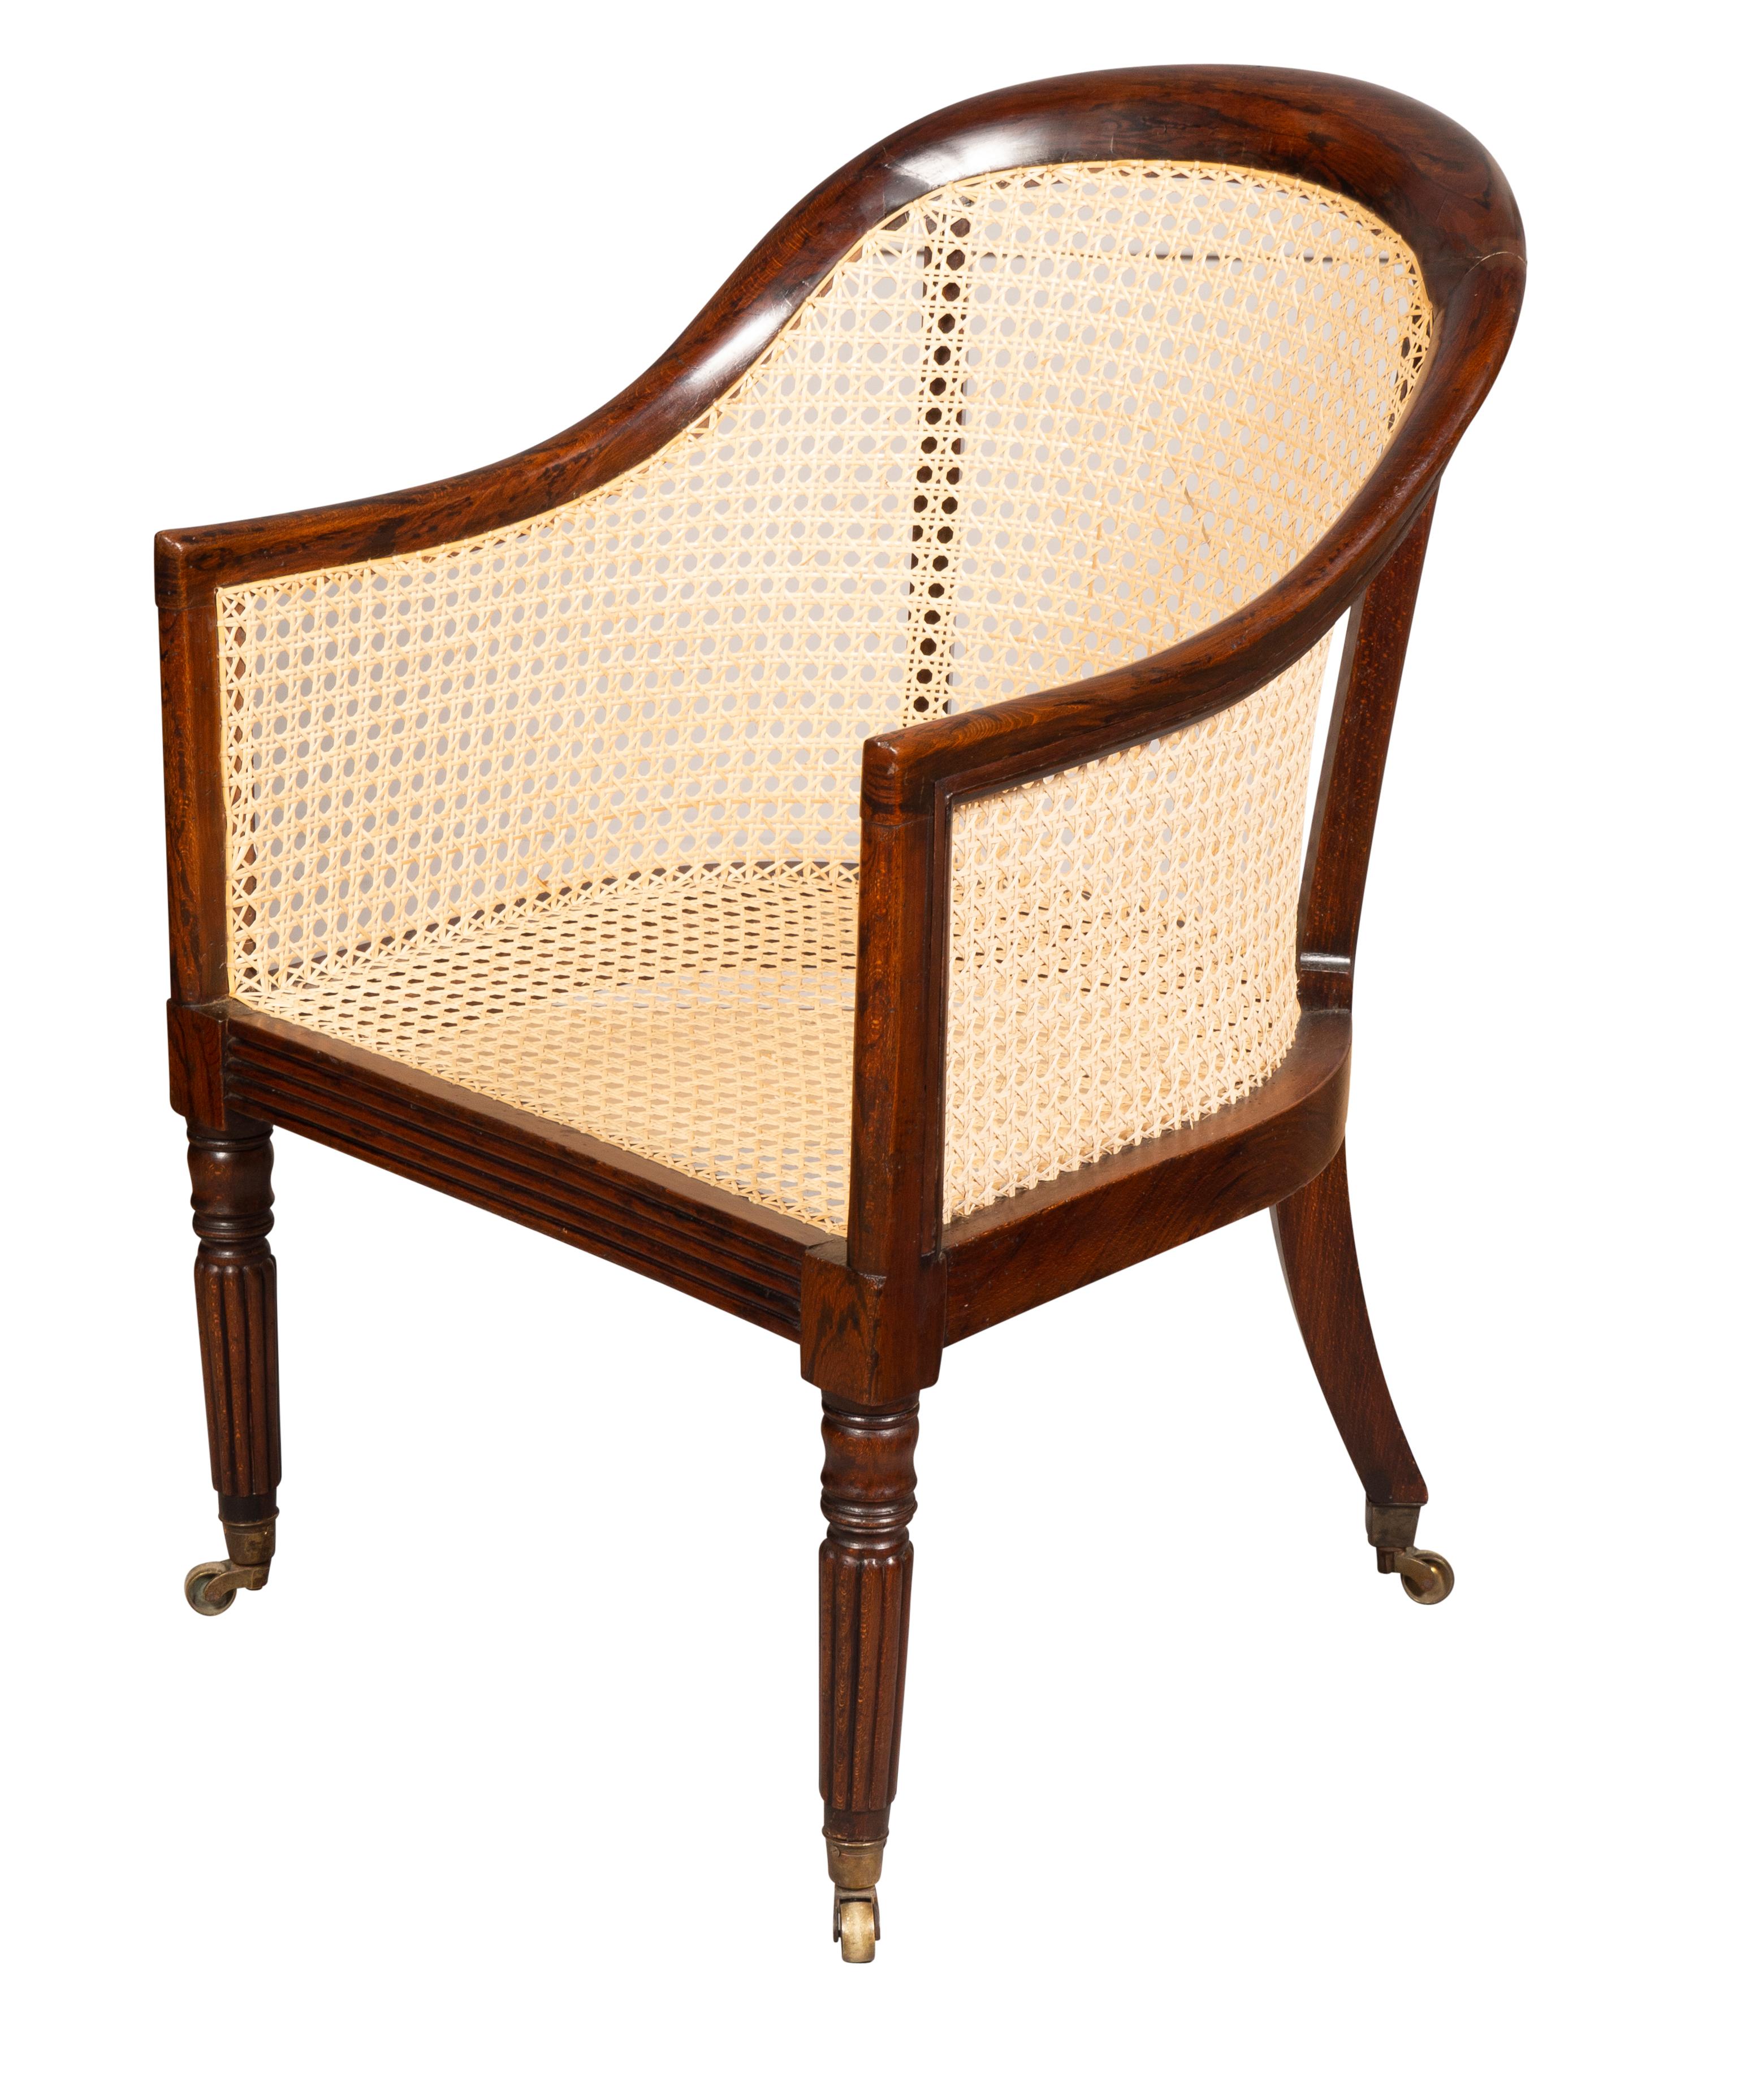 Early 19th Century Regency Faux Rosewood Caned Bergere For Sale